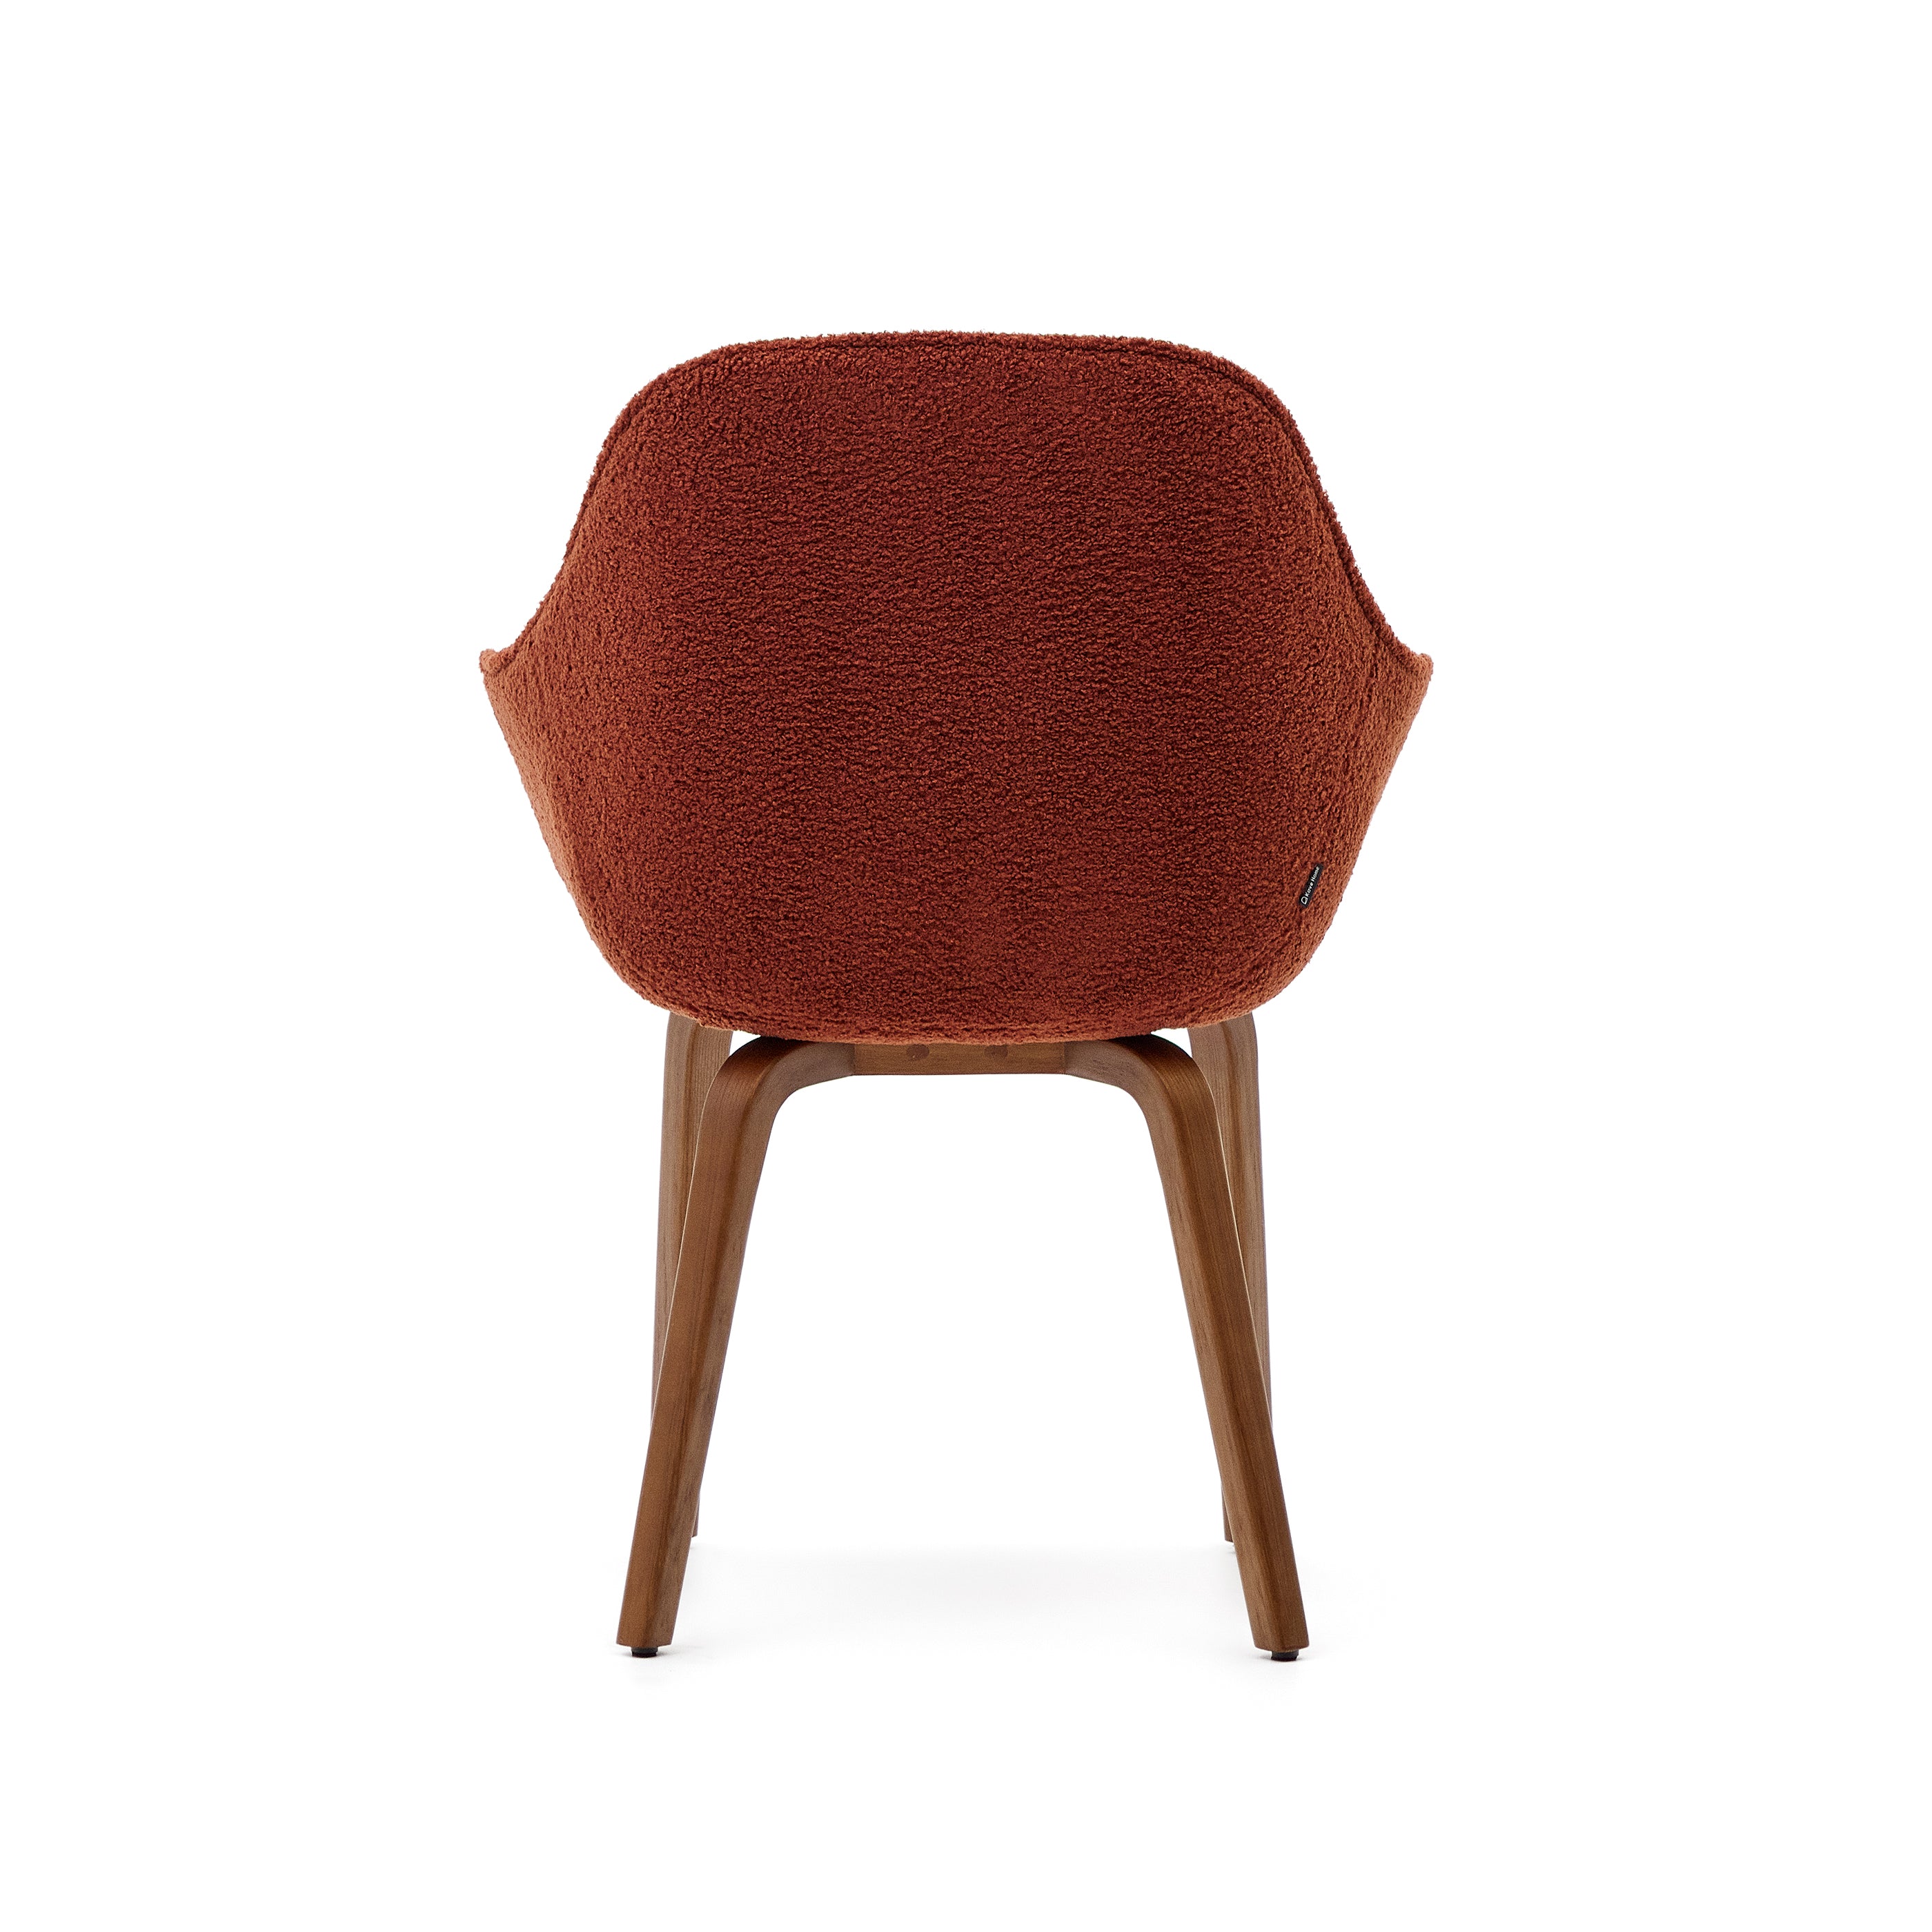 Aleli chair in terracota shearling with solid ash wood legs and walnut finish